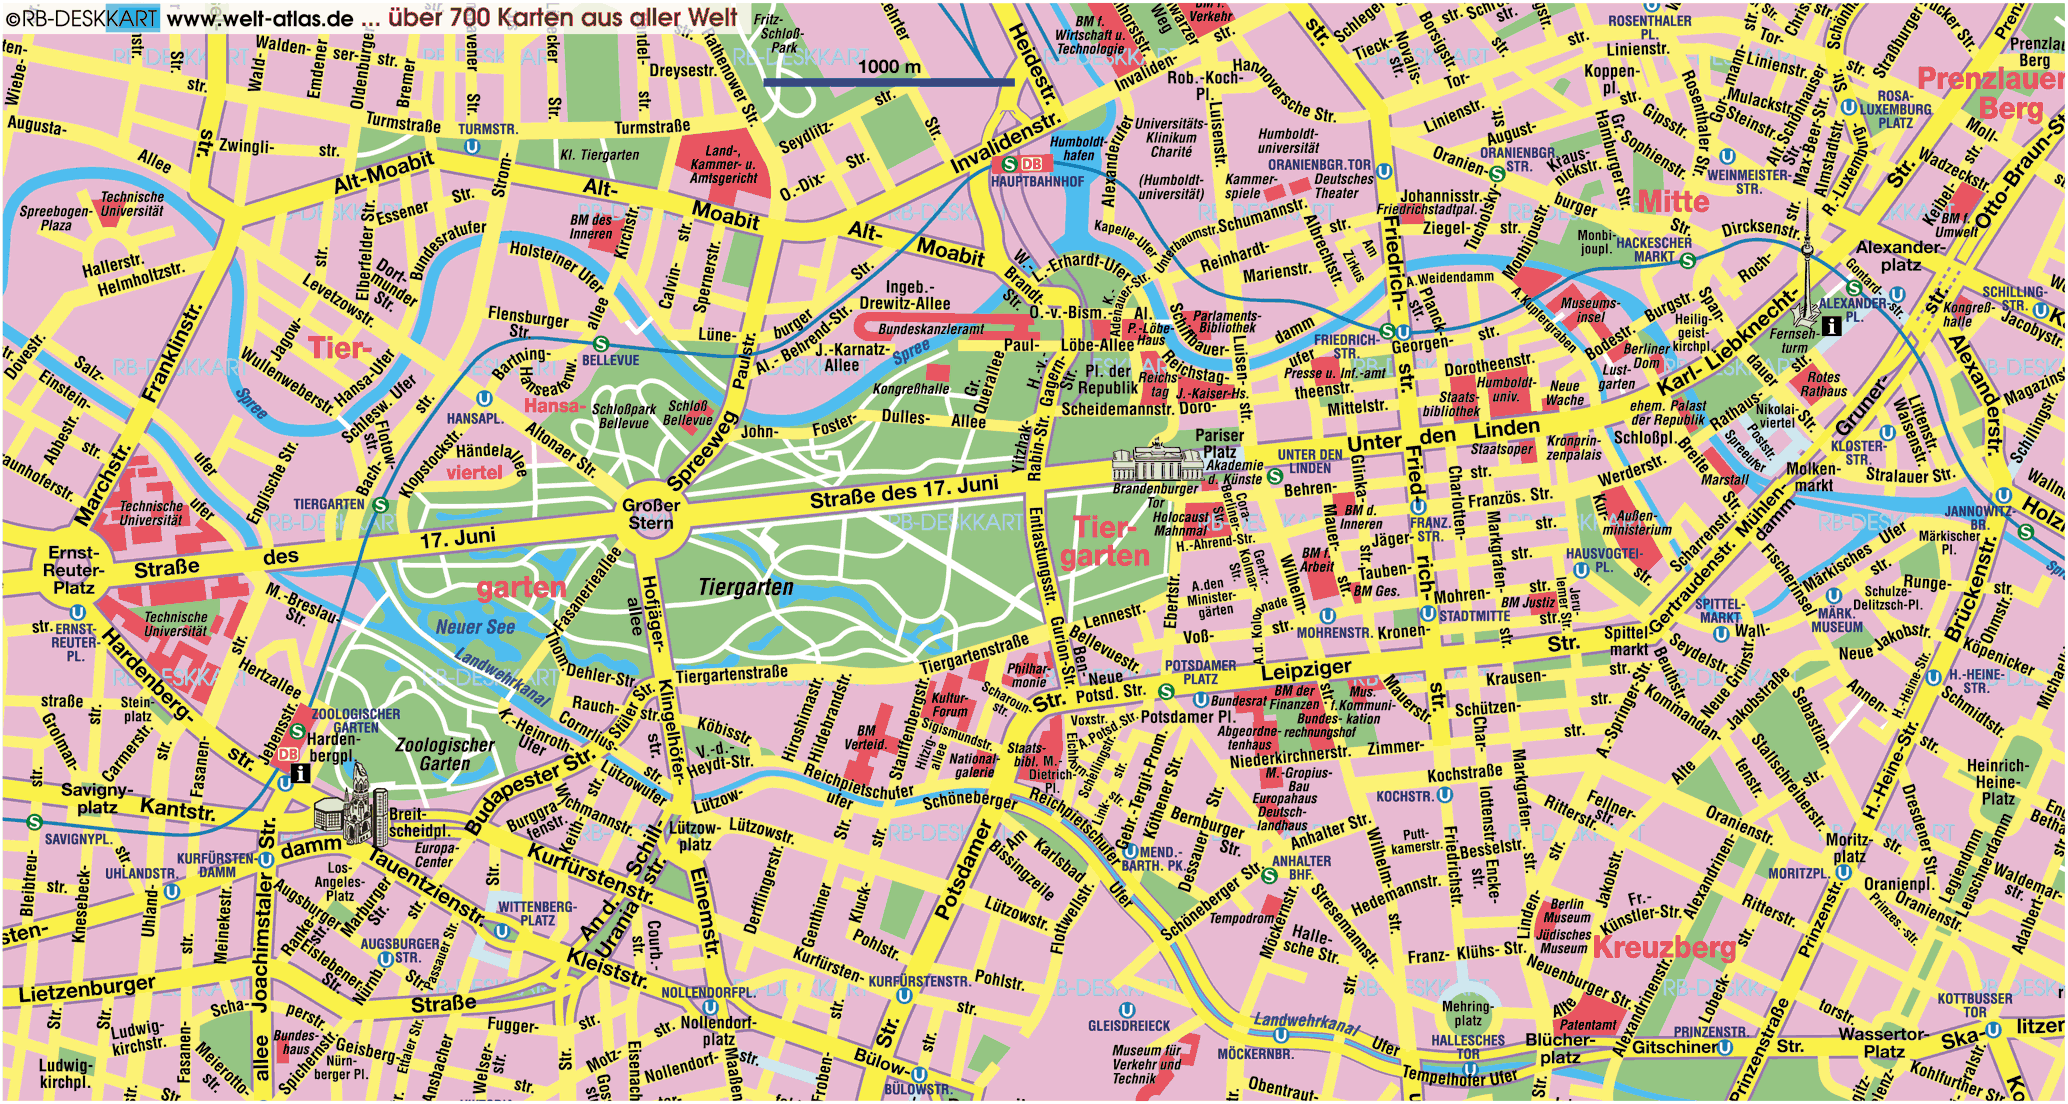 BERLIN MAP - Maps Of The World